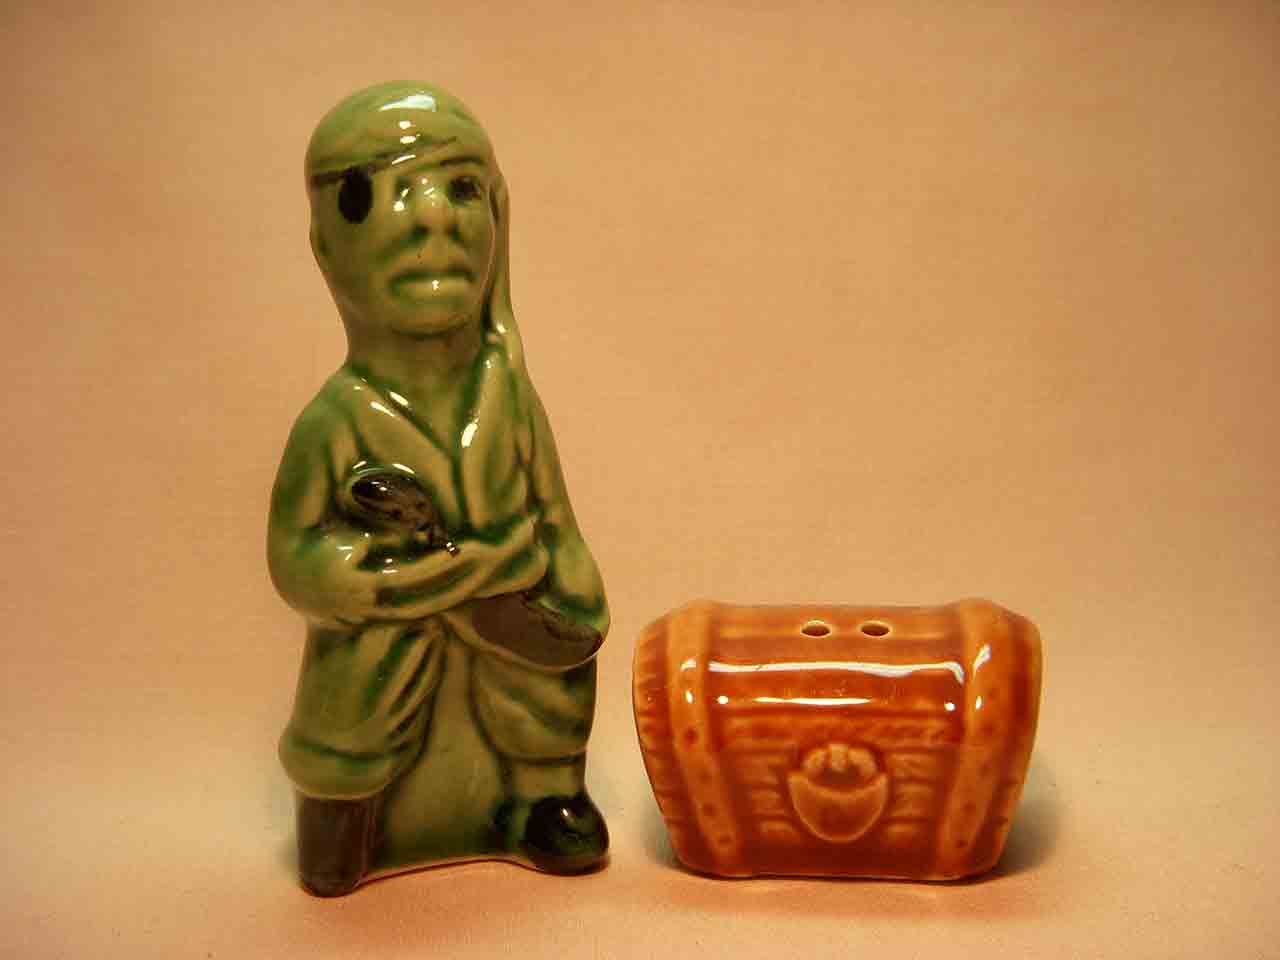 Go with pirate with treasure chest salt and pepper shaker